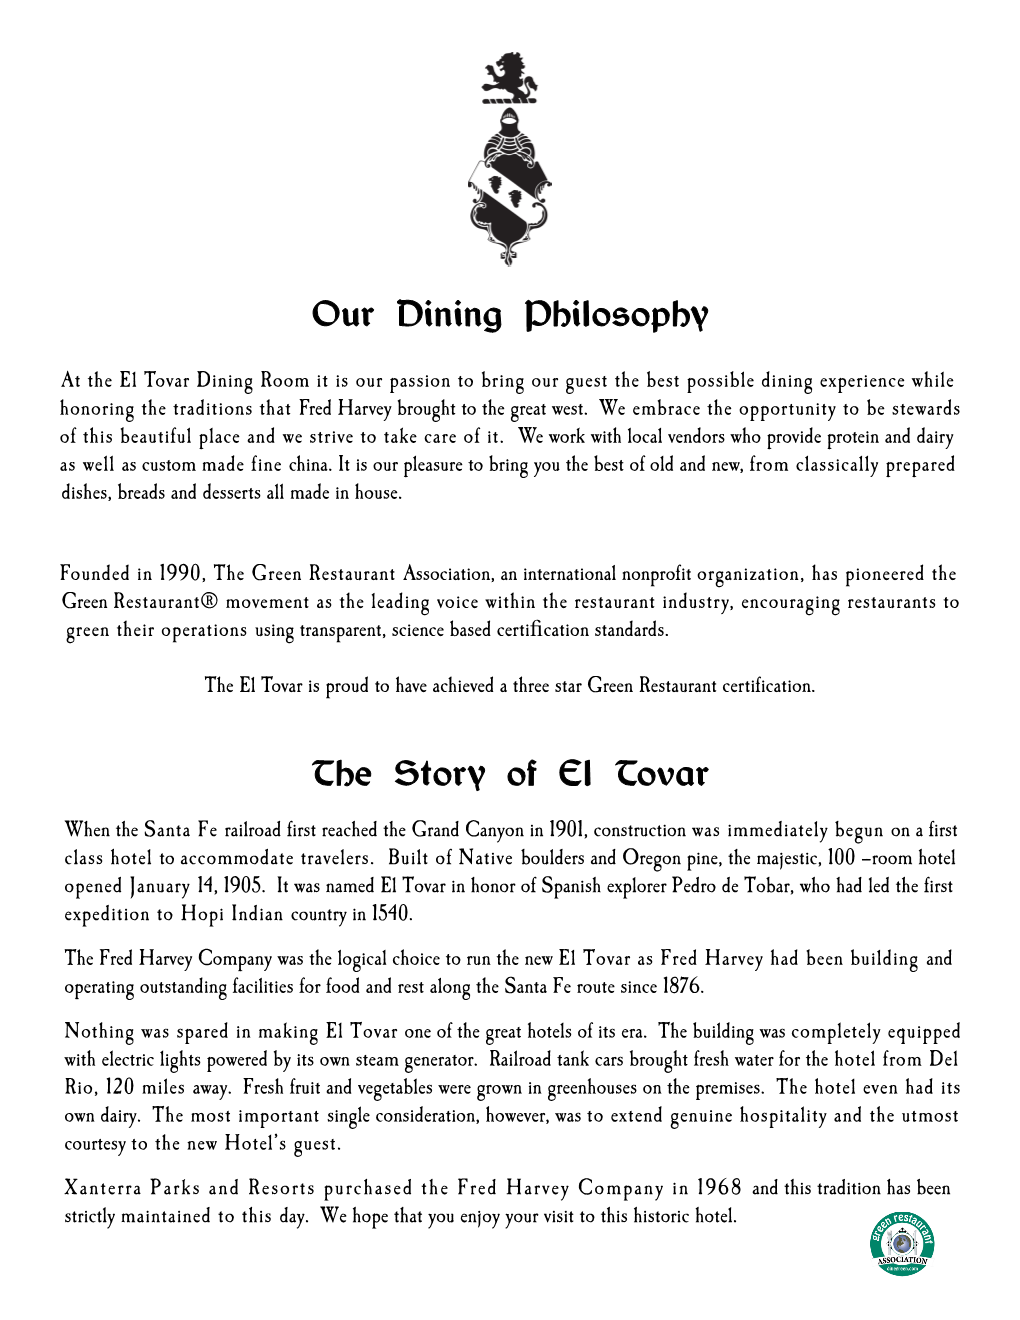 Our Dining Philosophy the Story of El Tovar